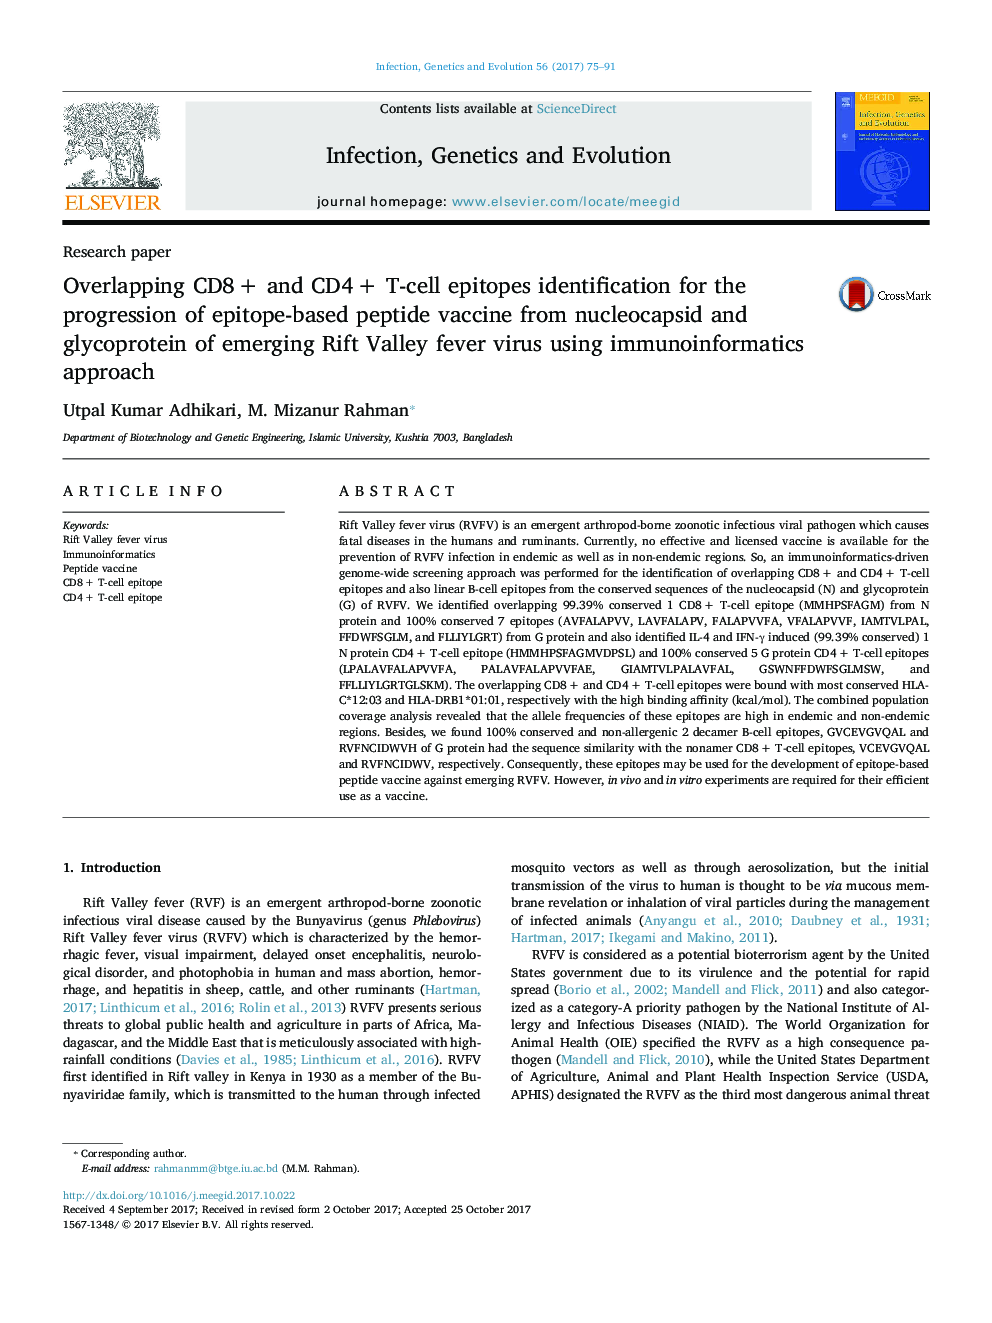 Overlapping CD8Â + and CD4Â + T-cell epitopes identification for the progression of epitope-based peptide vaccine from nucleocapsid and glycoprotein of emerging Rift Valley fever virus using immunoinformatics approach